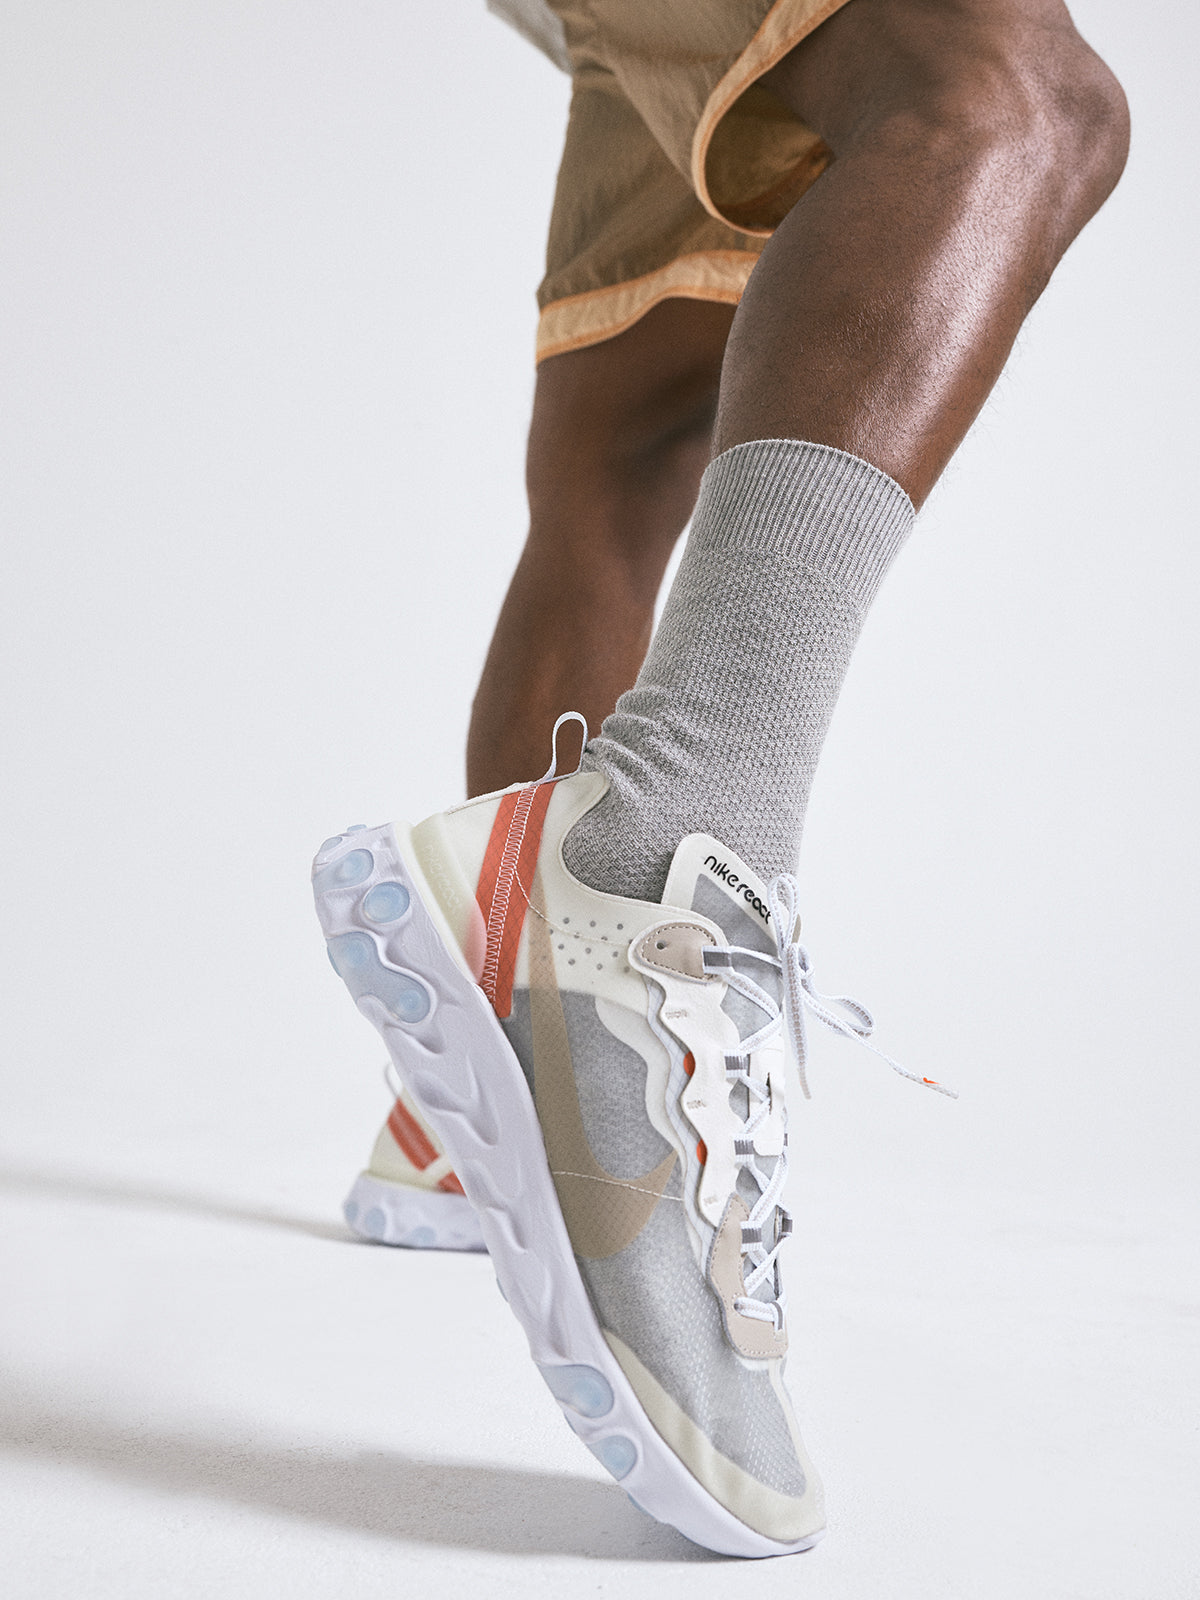 Kith Editorial for the Nike React Element 87